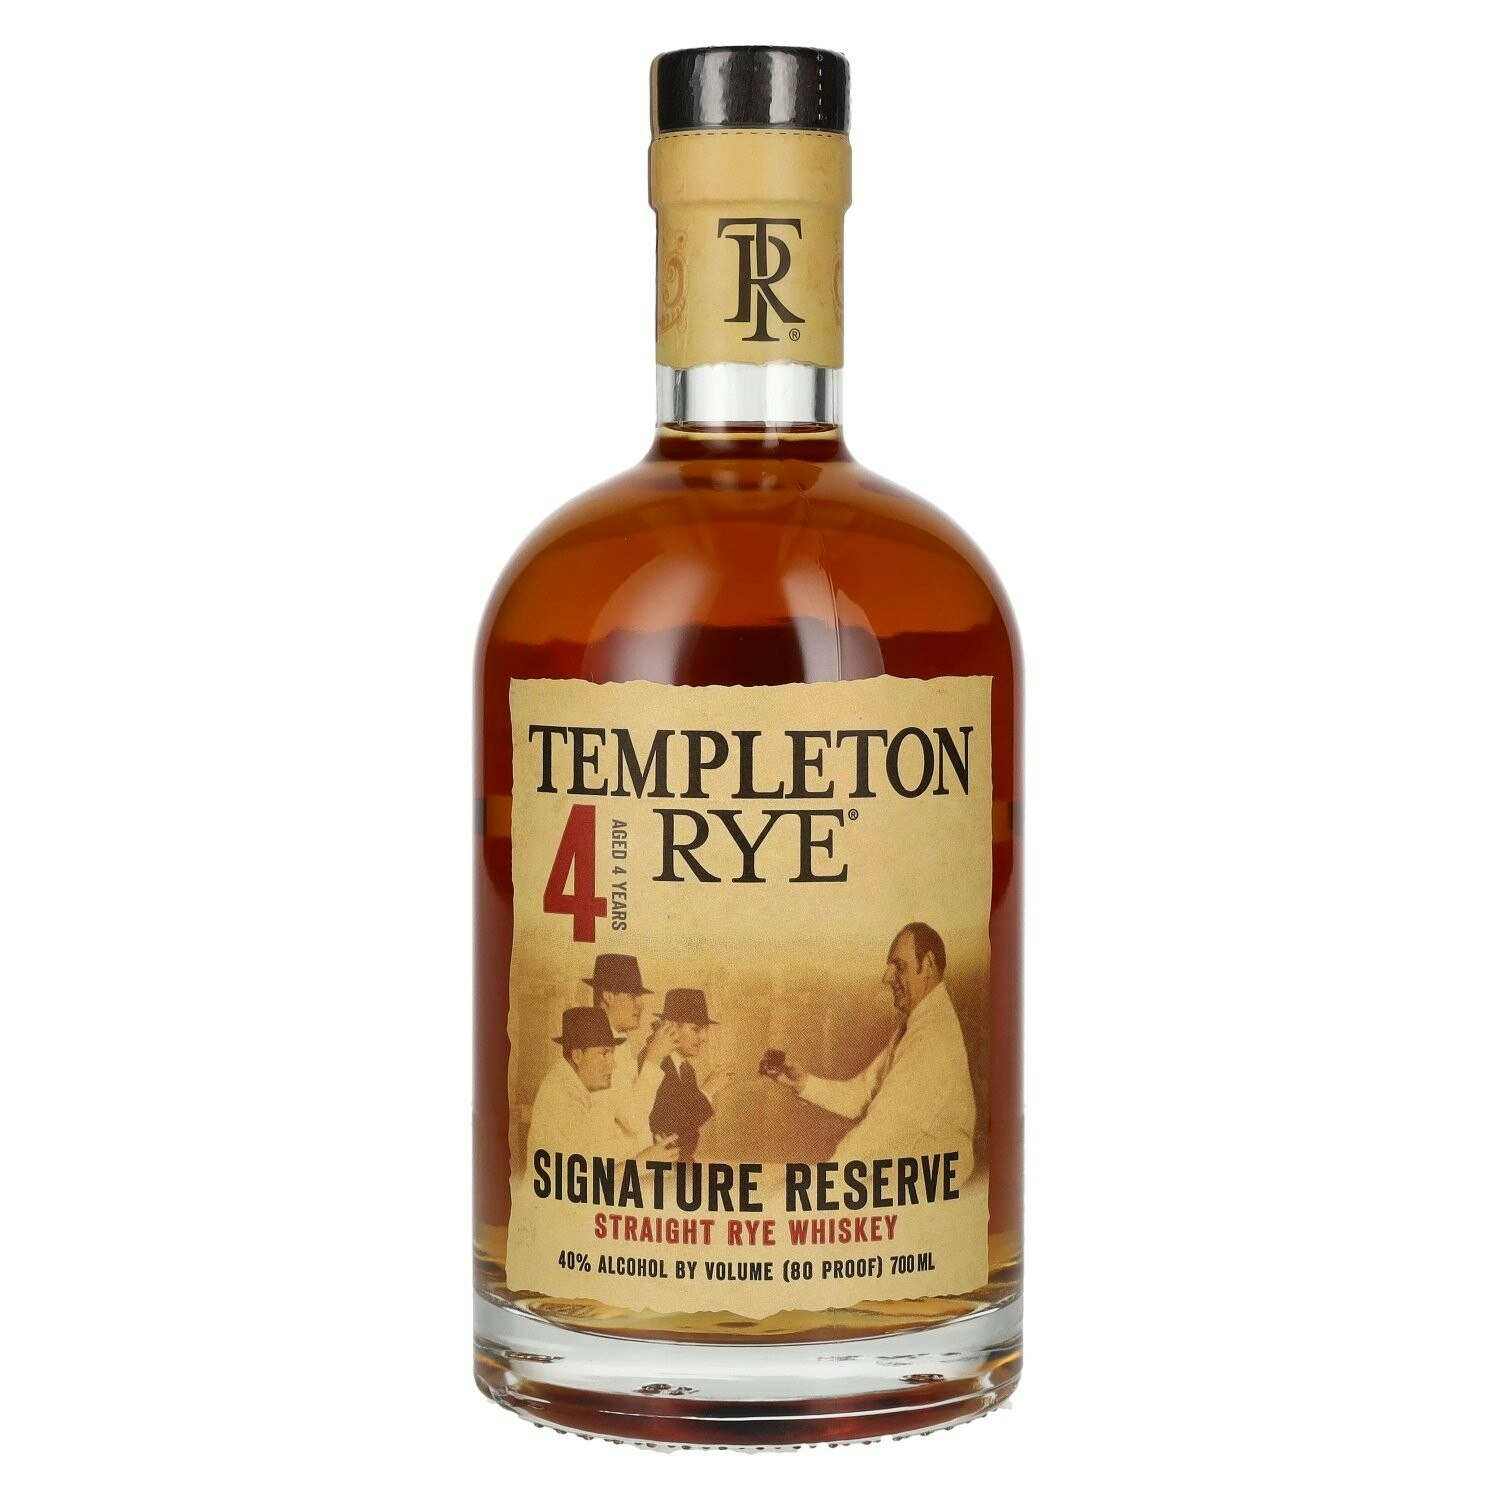 Templeton Rye 4 Years Old Signature Reserve Straigth Rye Whiskey 40% Vol. 0,7l